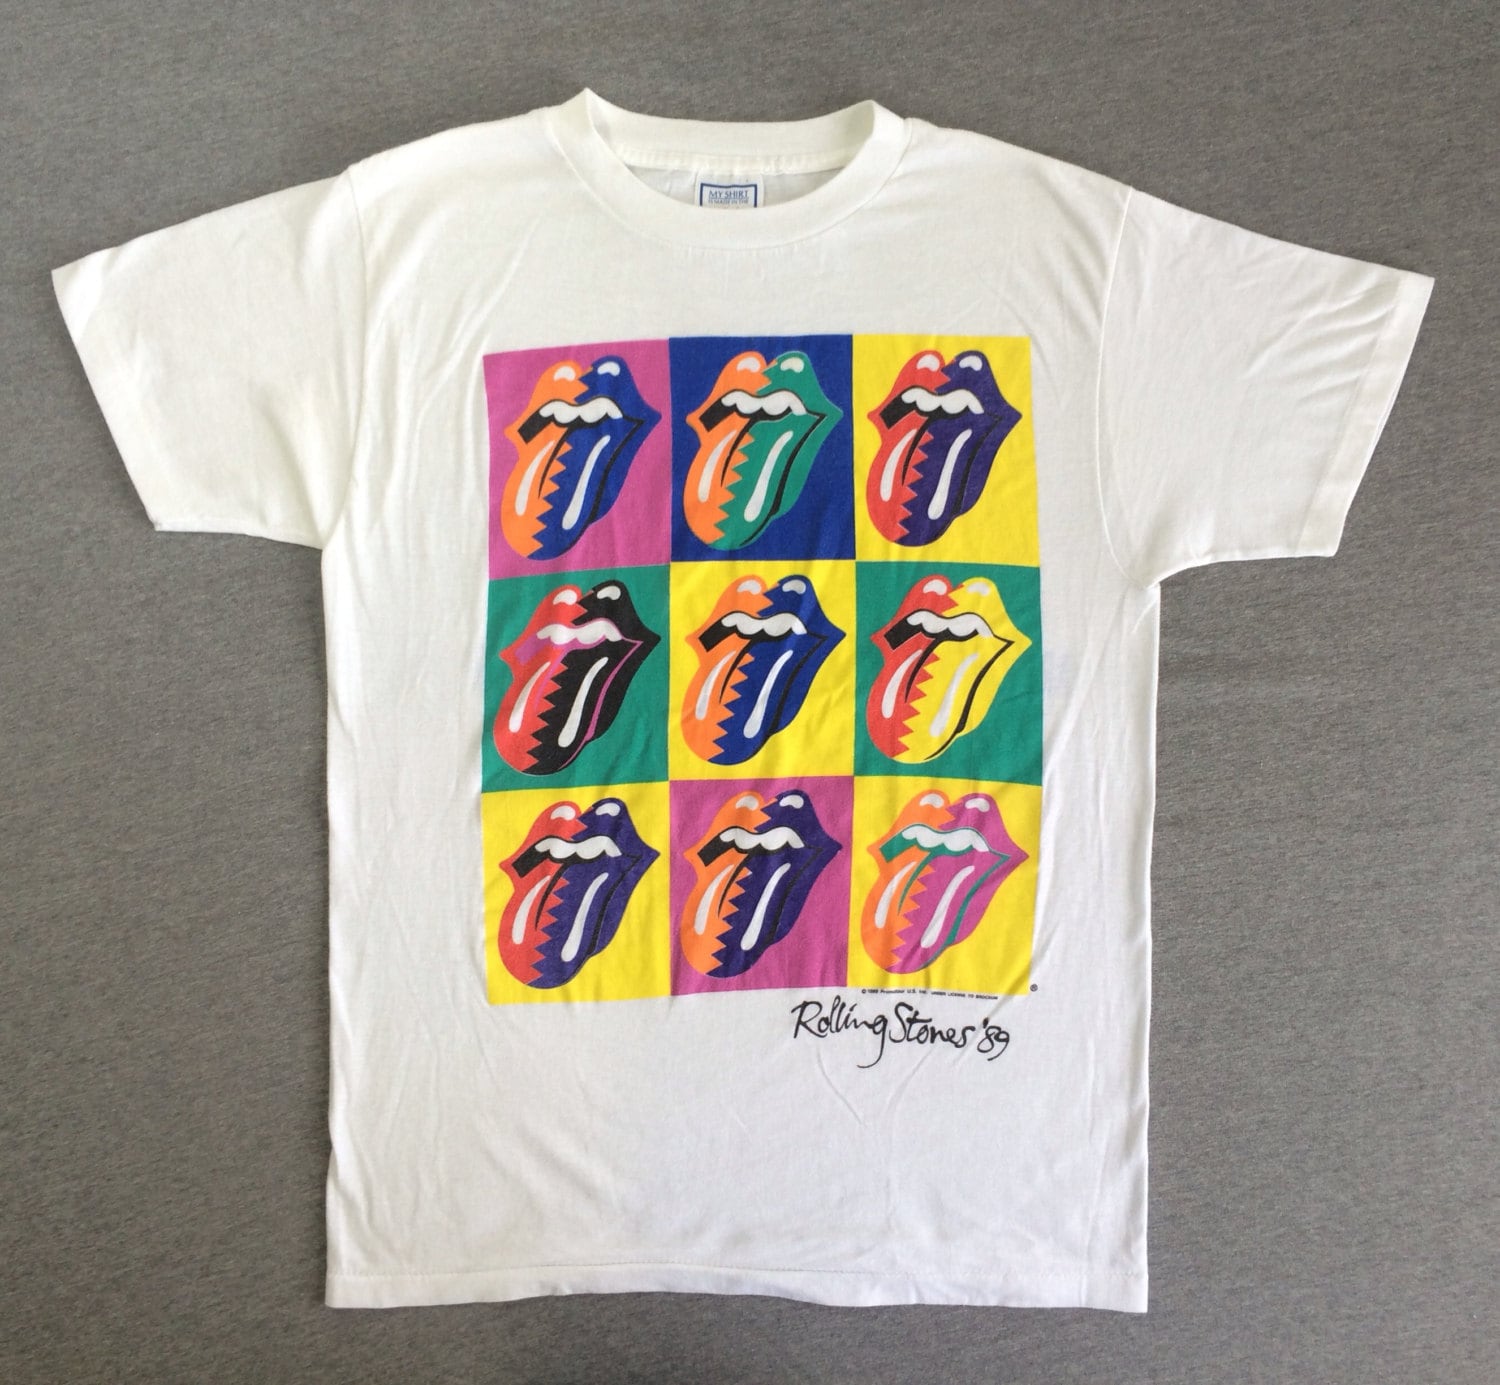 Philadelphia rolling stones 1989 tour t shirt west ball, Pull and bear looney tunes t shirt, new neck design for kurti. 